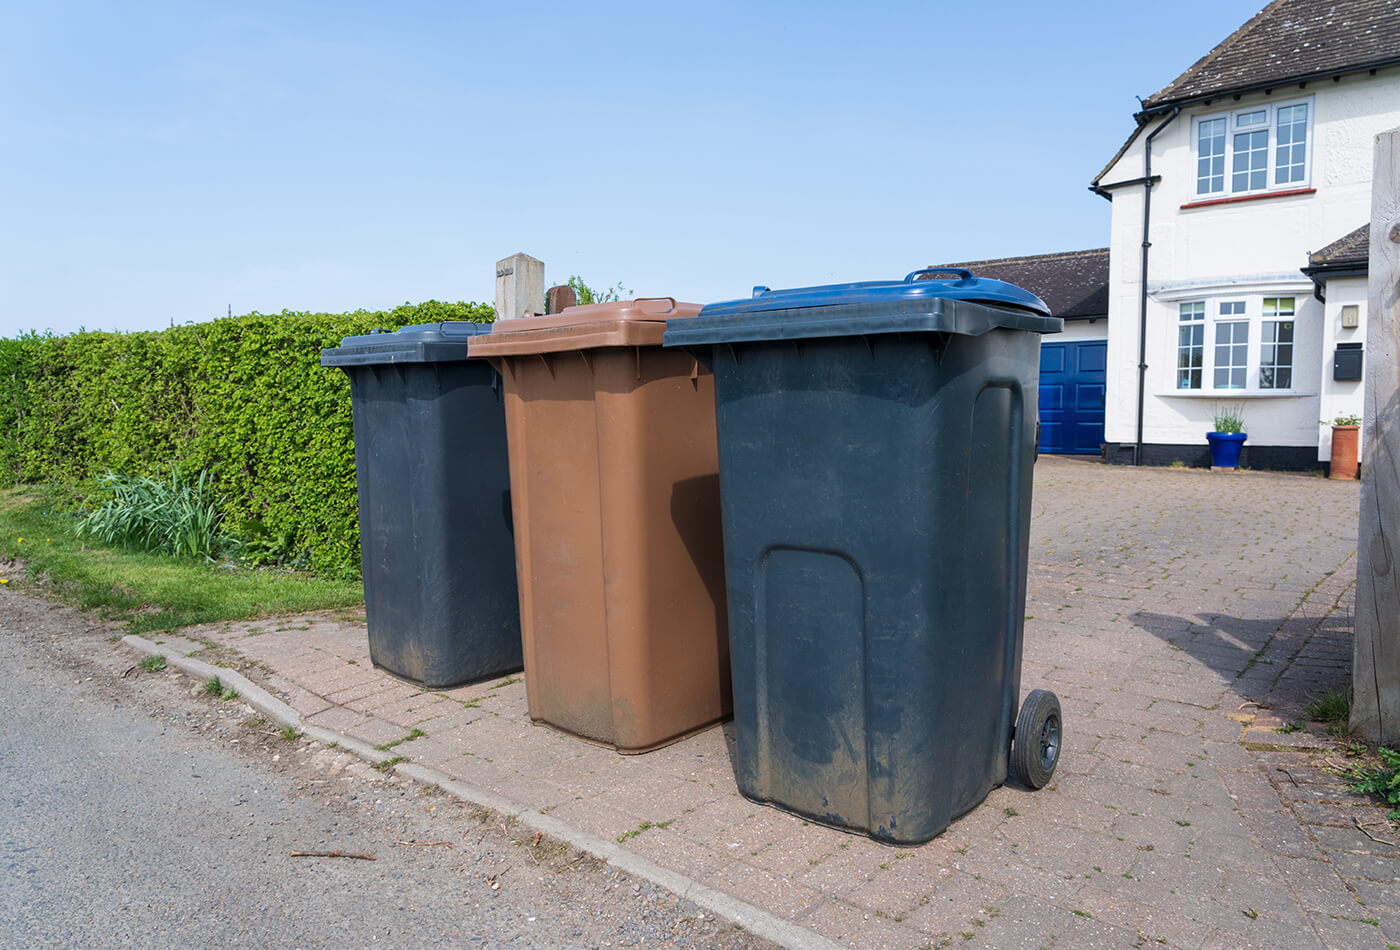 Cornwall holiday home waste collection